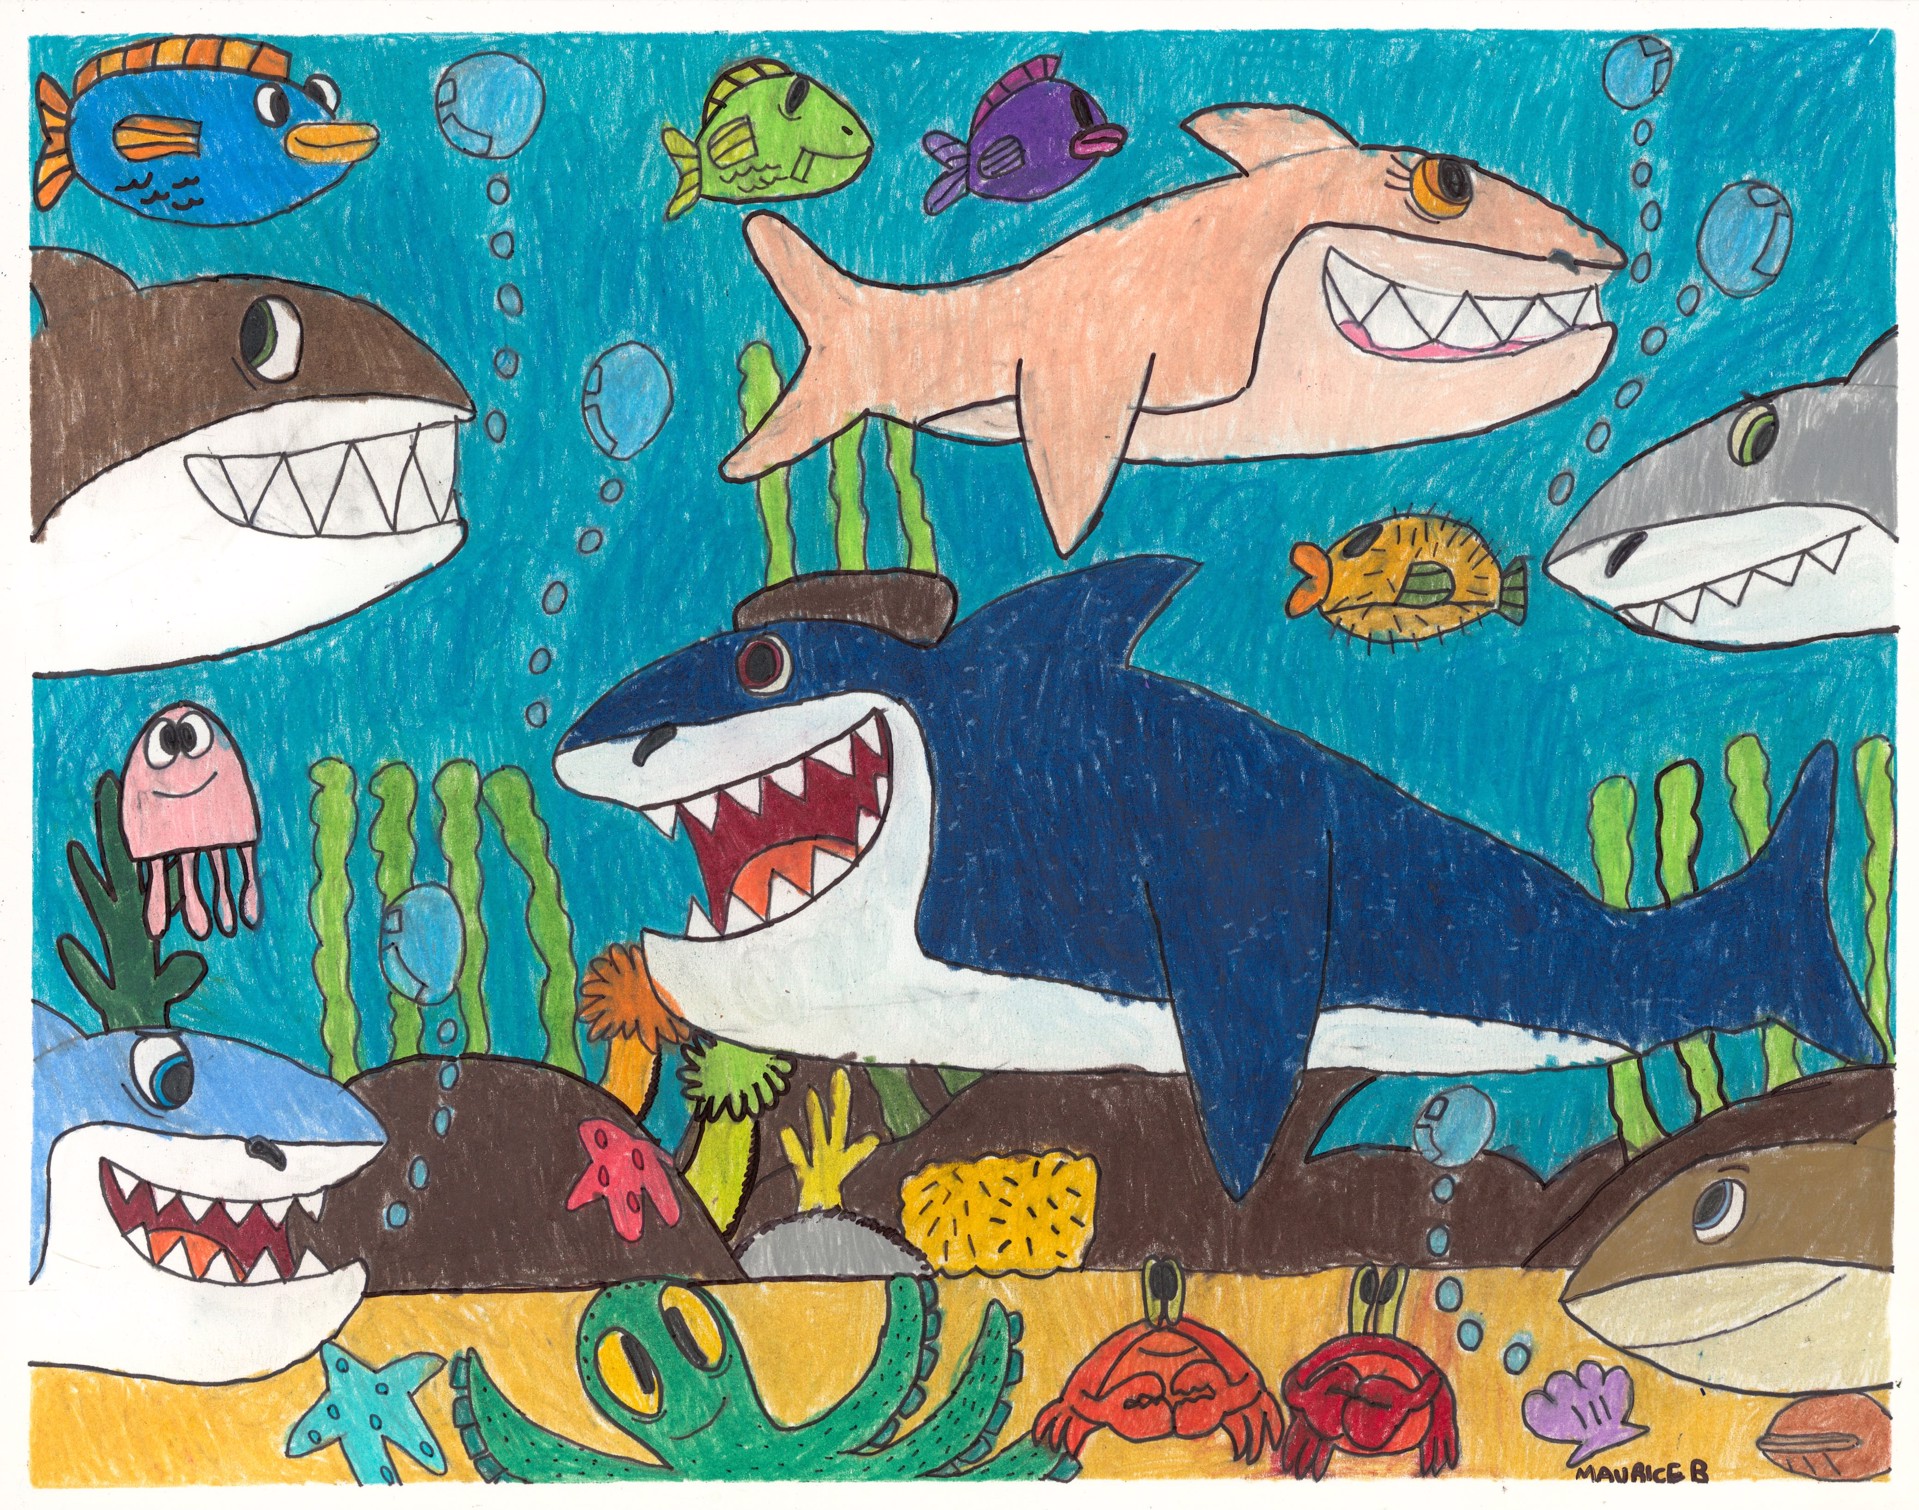 Sharks Under Sea by Maurice Barnes